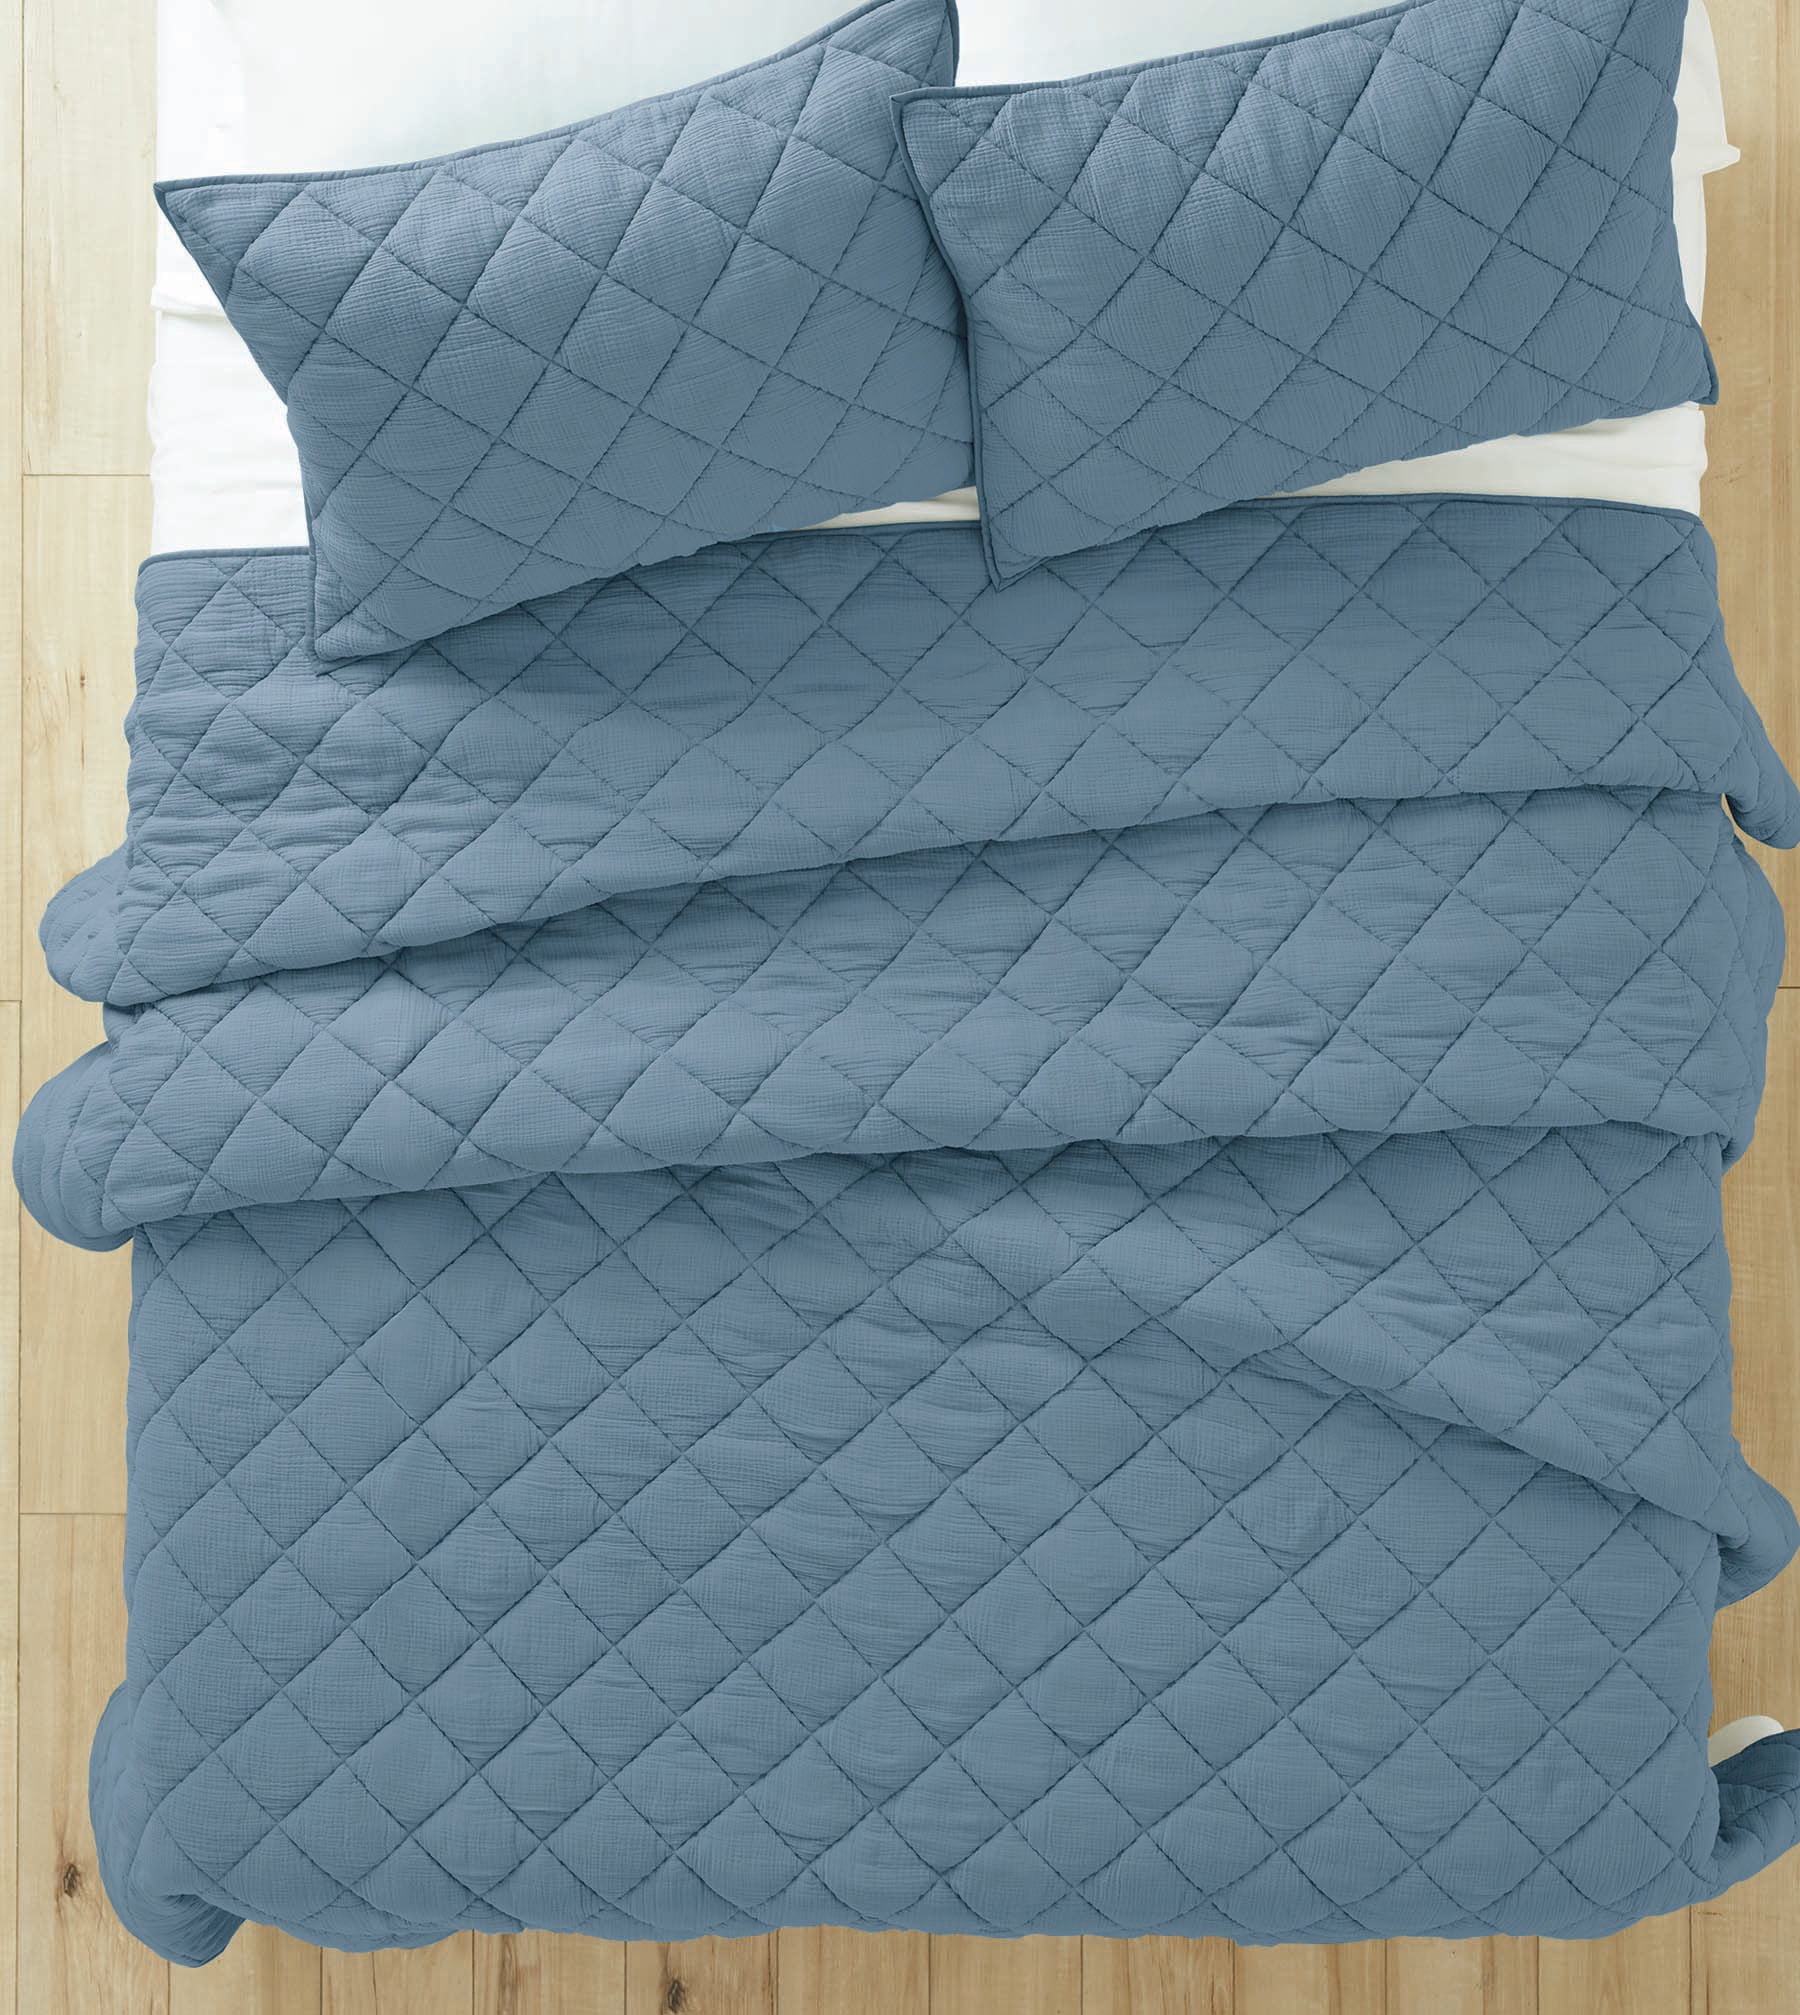 Select Walmart Stores: Better Homes & Gardens Cotton Quilt: Queen $6, King $7 + Free Store Pickup